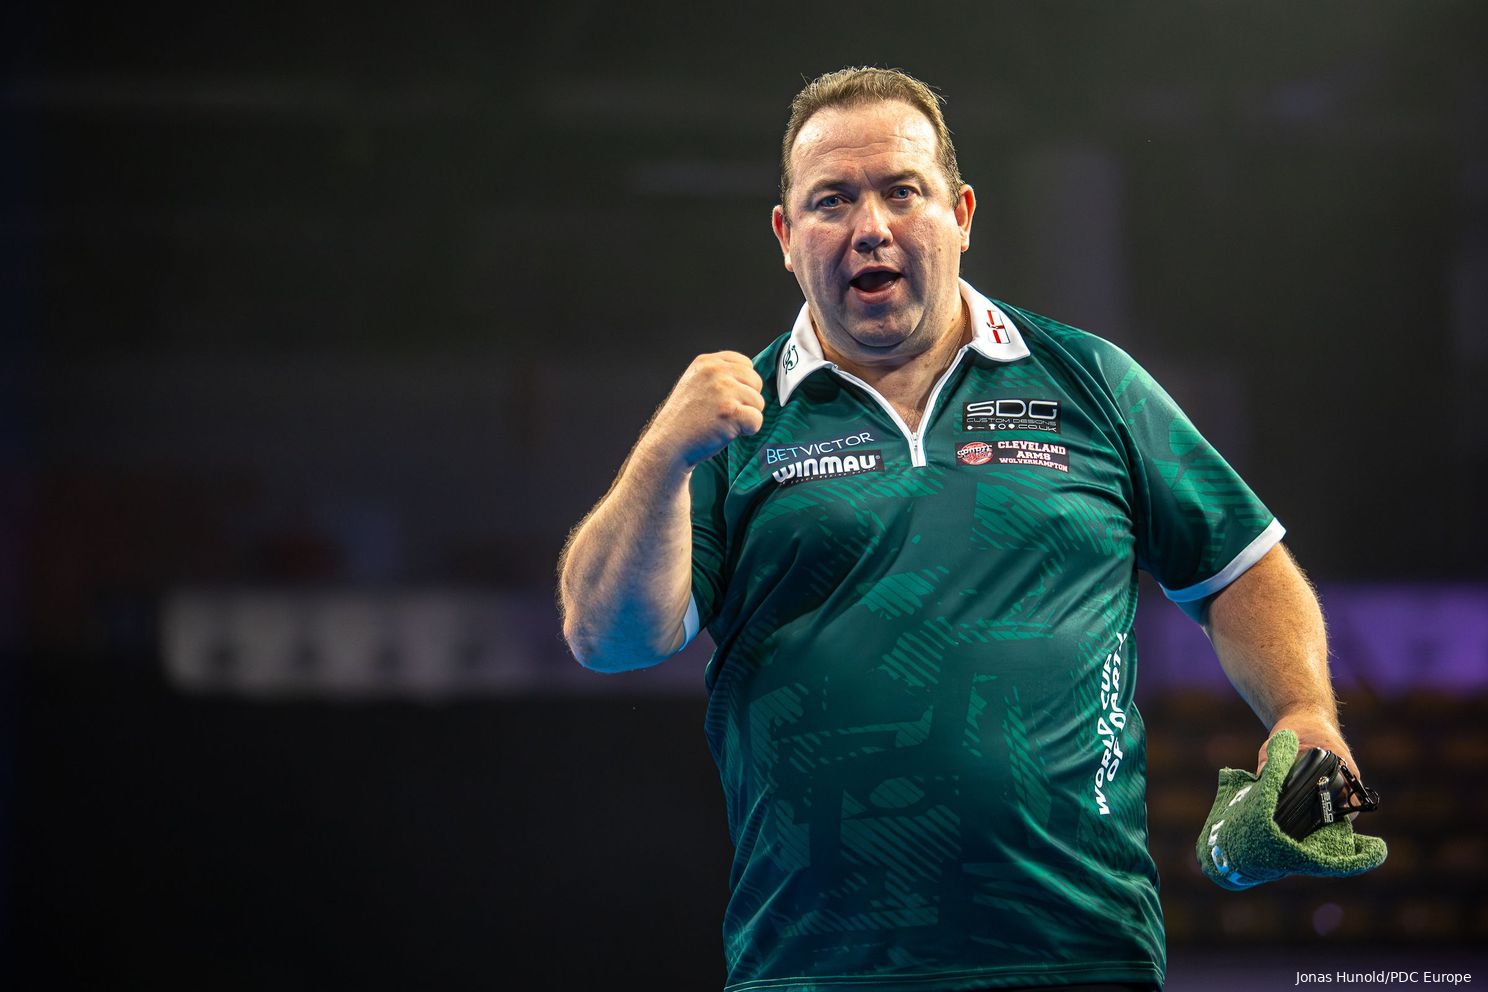 "I don't want to jump the gun but I'm very confident" - Northern Ireland's Brendan Dolan & Josh Rock determined to bring home World Cup success